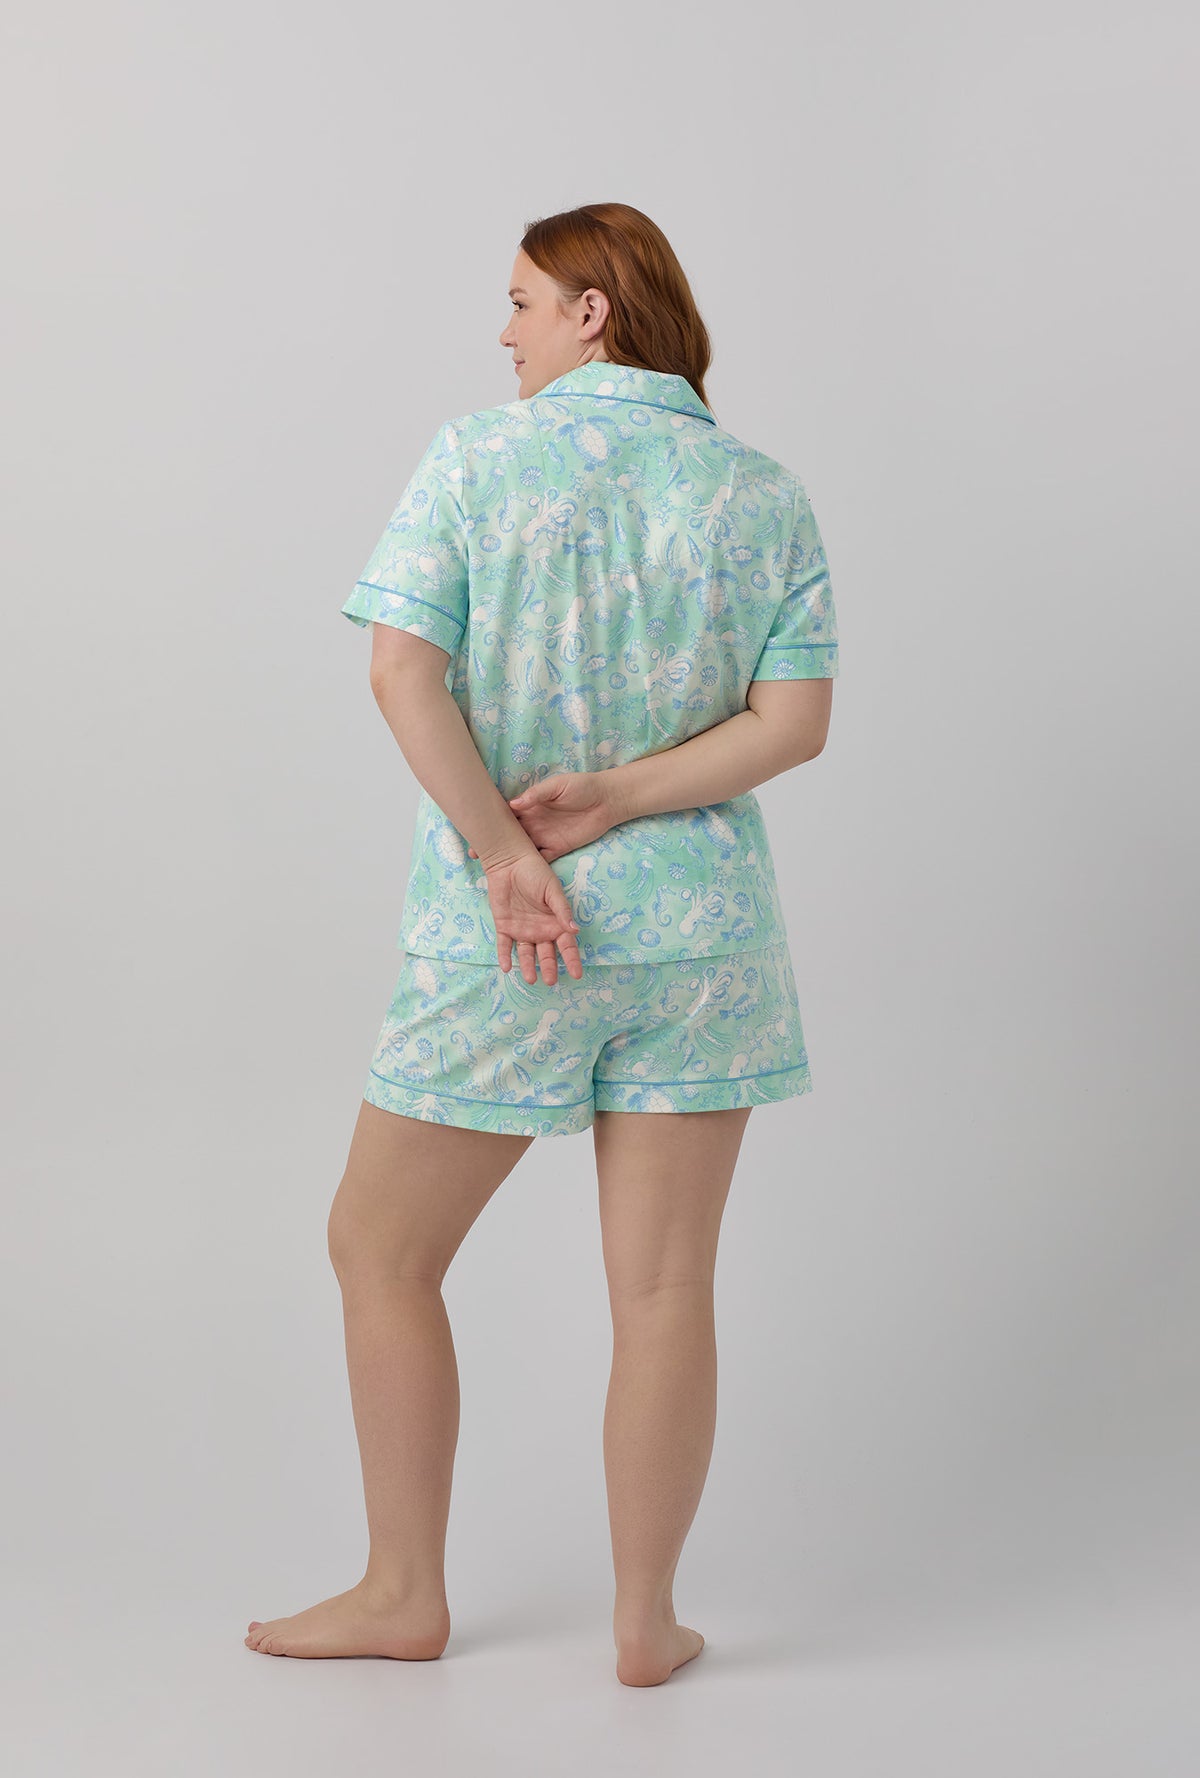 A lady wearing white short sleeve classic shorty stretch jerset plus size pj set with aquatic life print